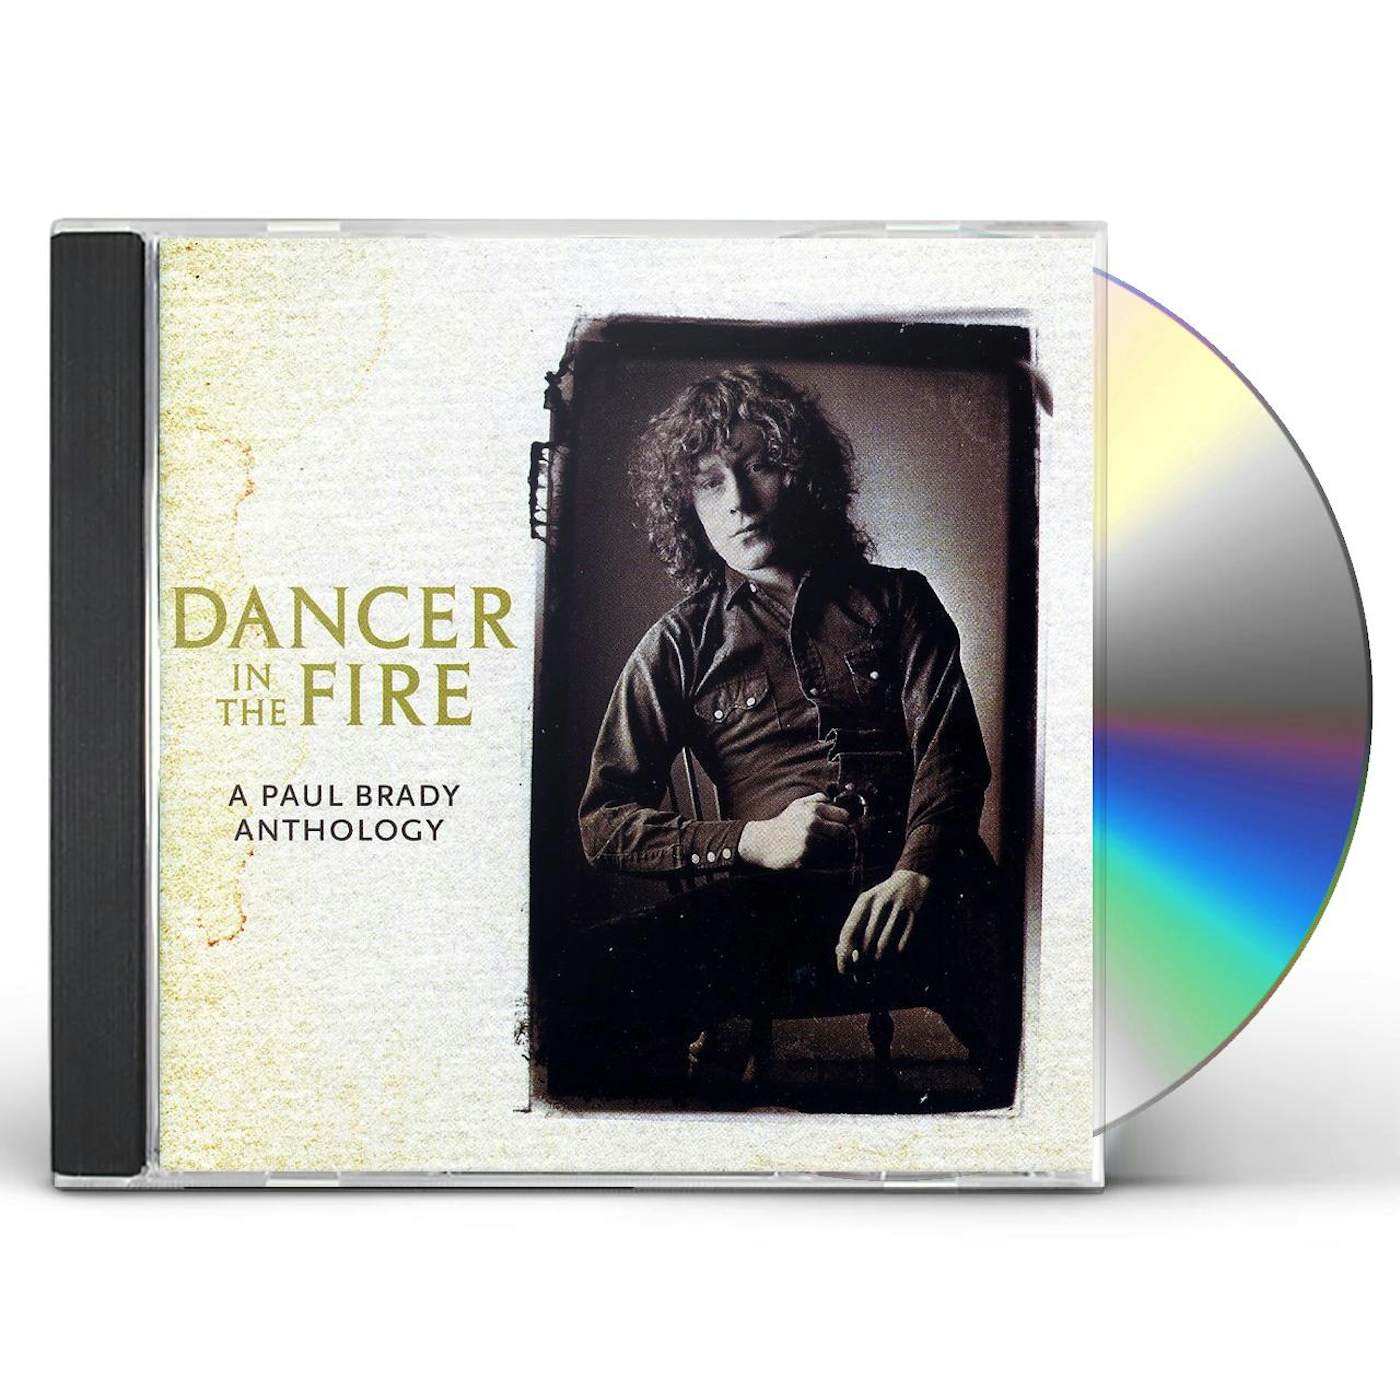 DANCER IN THE FIRE: A PAUL BRADY ANTHOLOGY CD